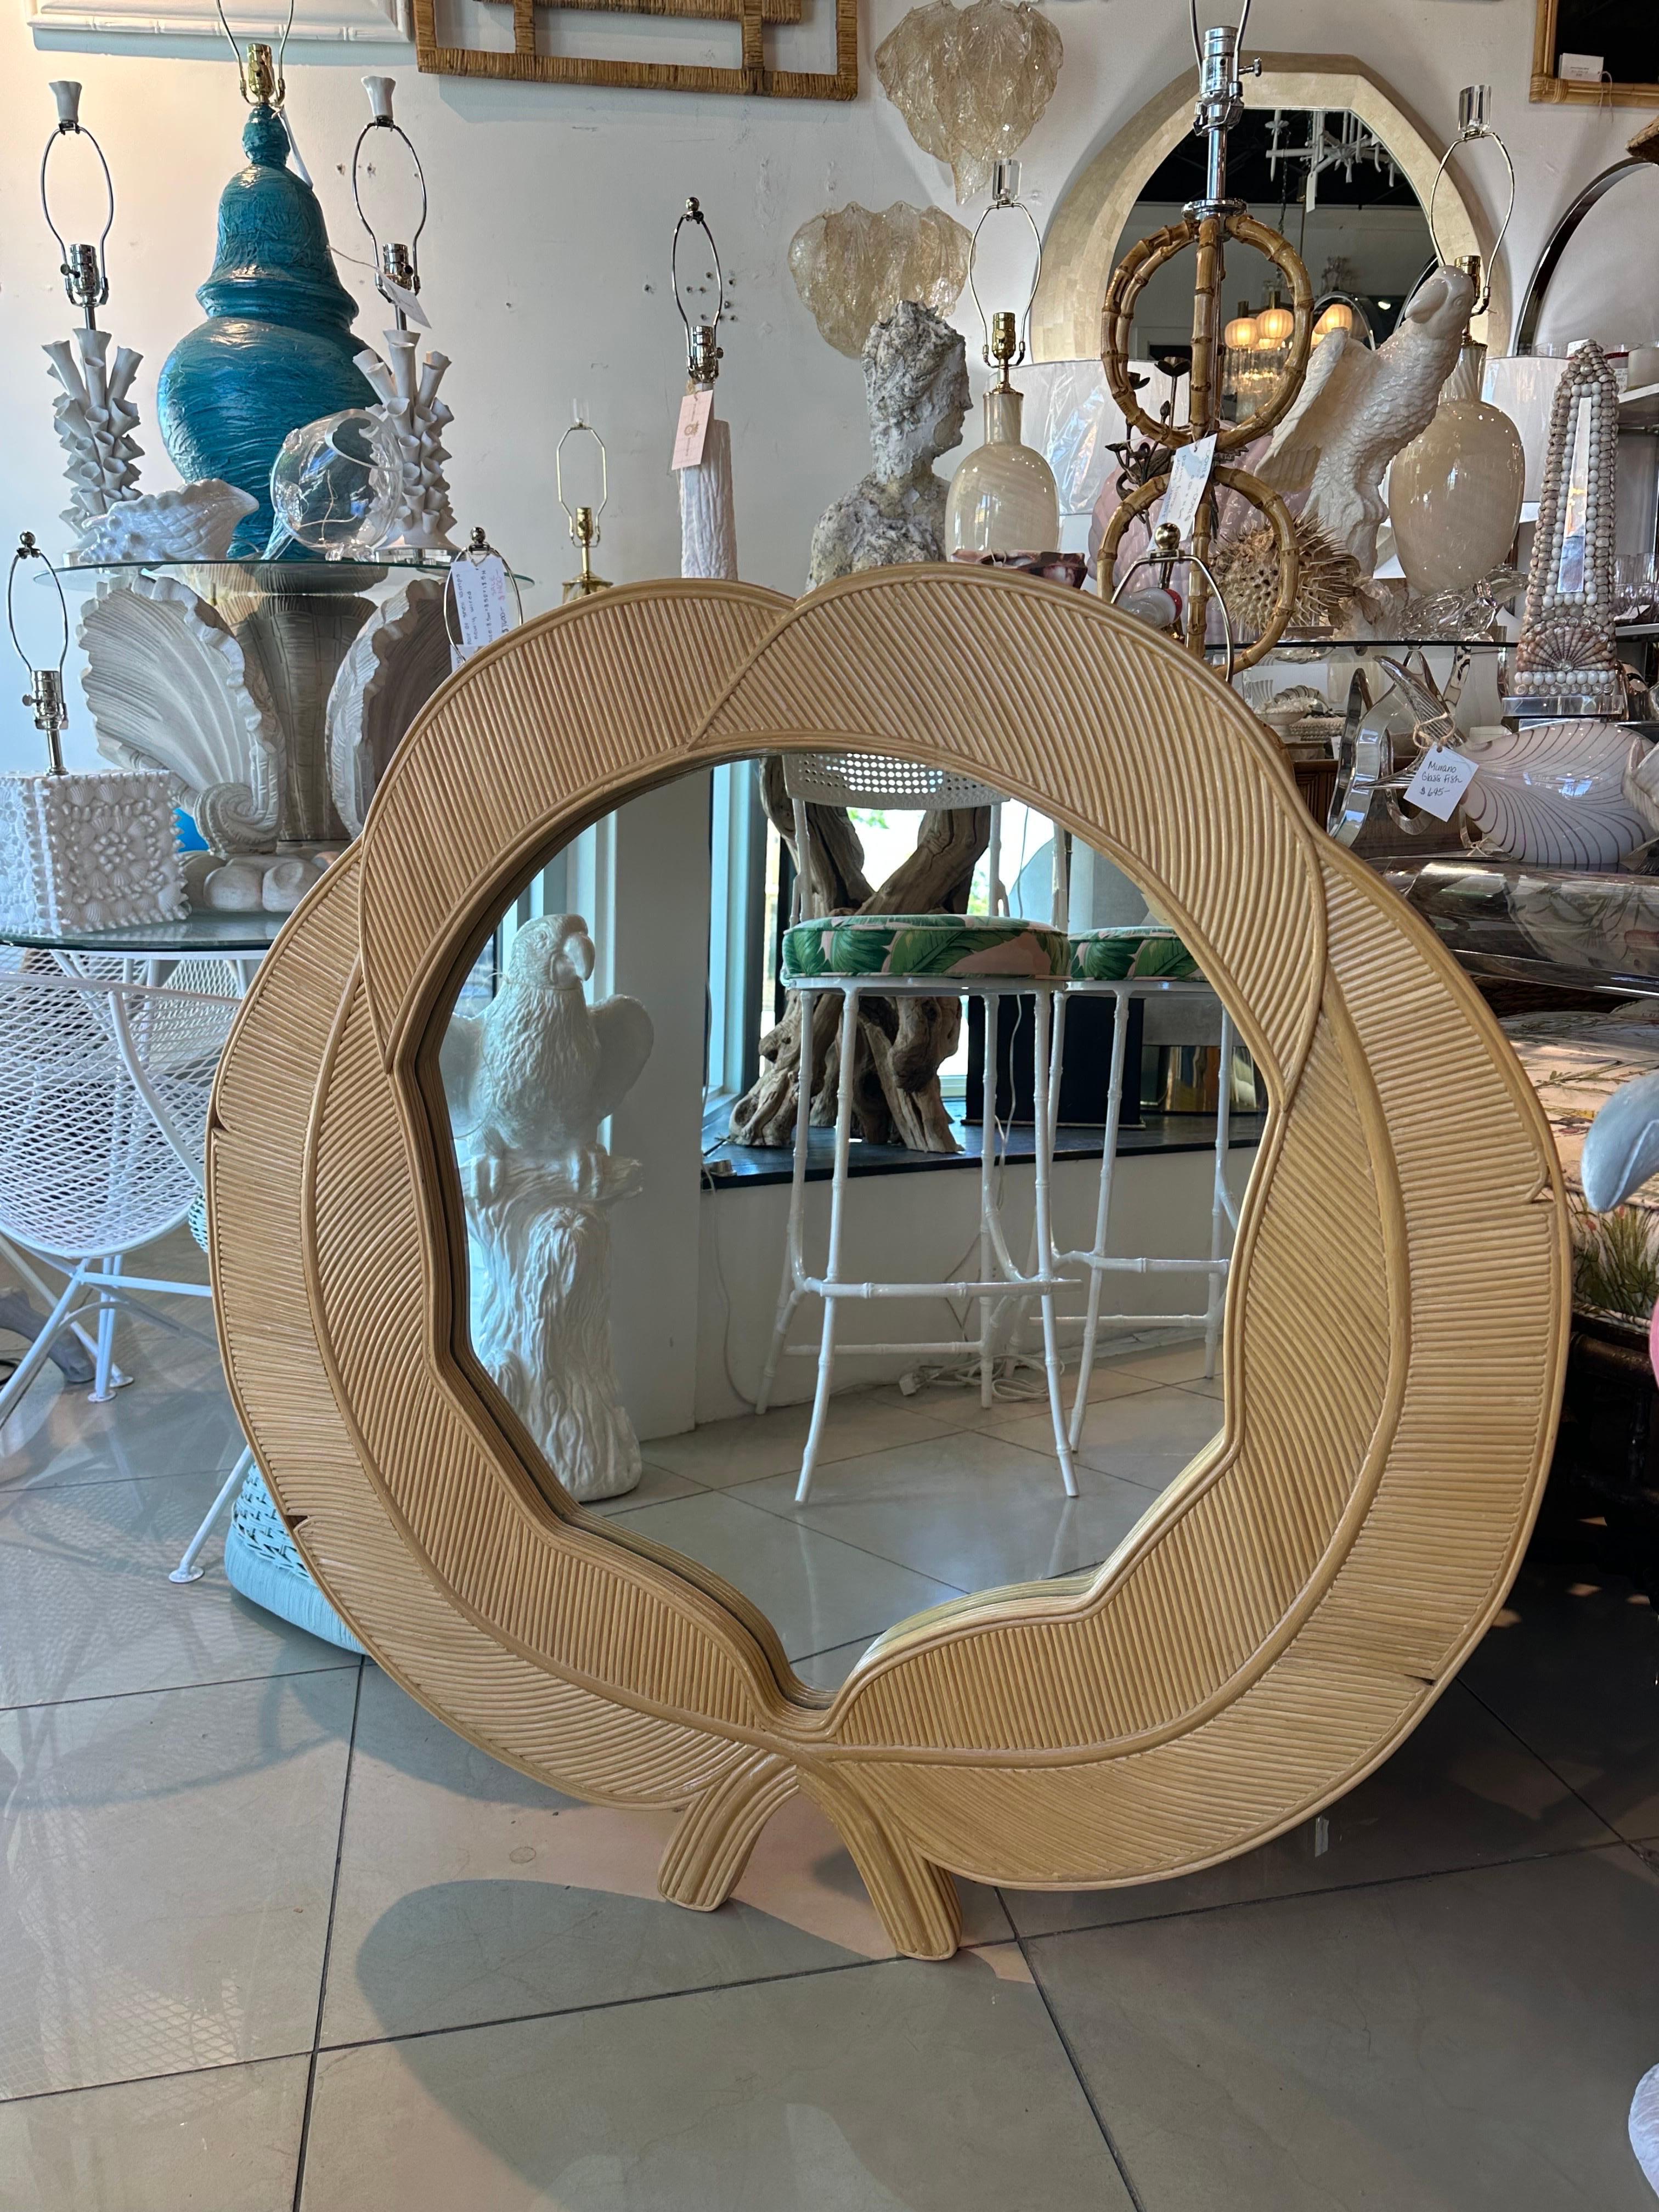 Vintage 1970s Vivai Del Sud Italian wall mirror. Bamboo rattan pencil reed leaf leaves tropical design. Comes ready to hang on your wall. No damage. Dimensions: 39.5 D x 1 D. 